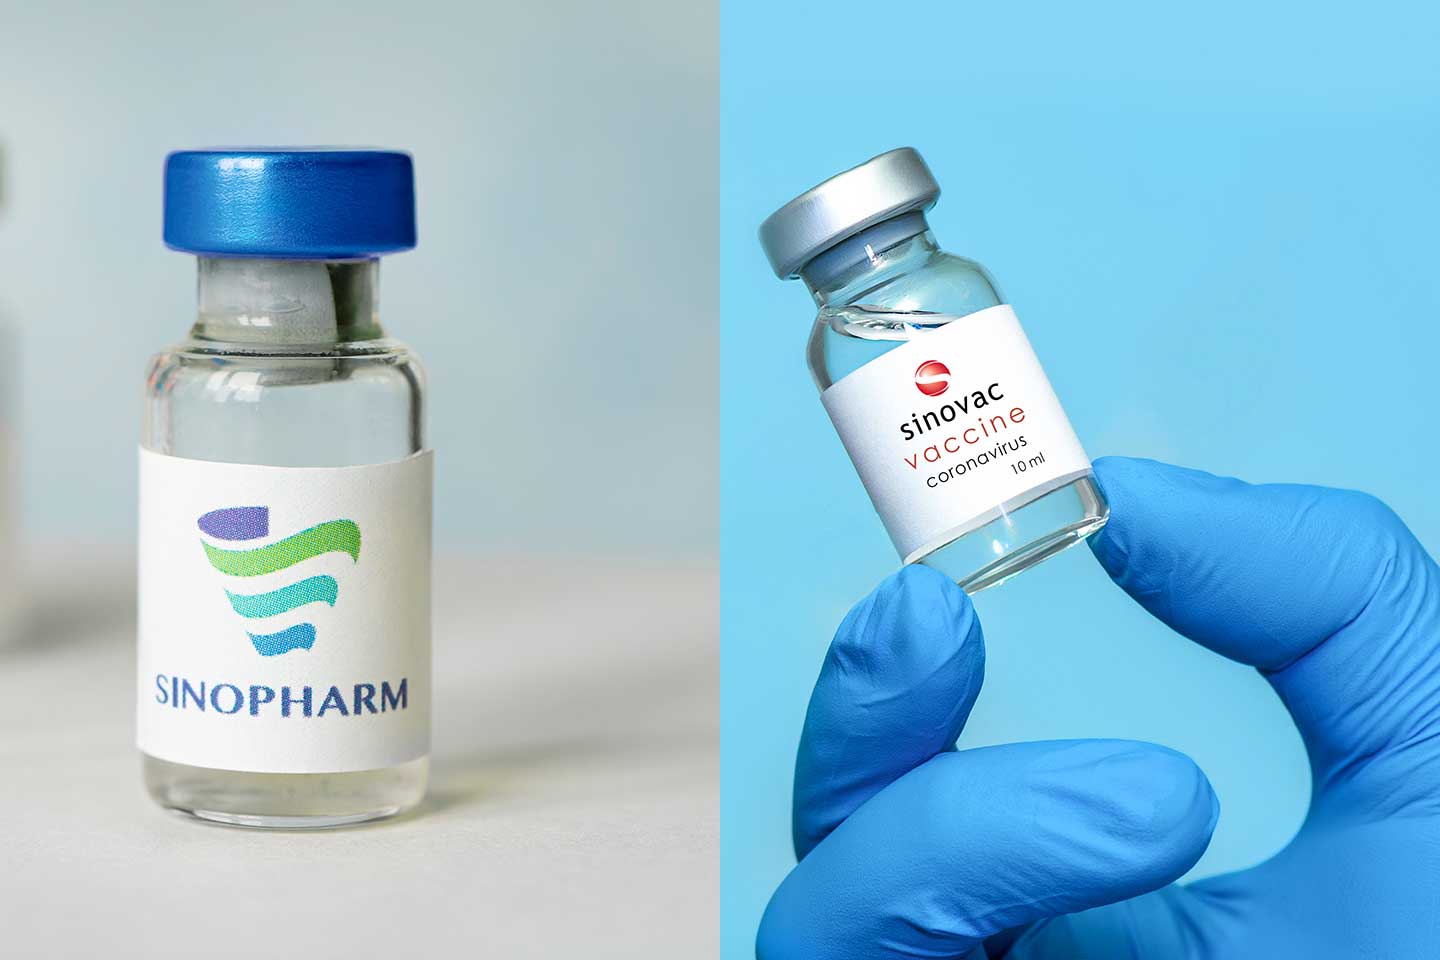 Gavi Signs Agreements With Sinopharm And Sinovac For Immediate Supply To Covax Gavi The Vaccine Alliance